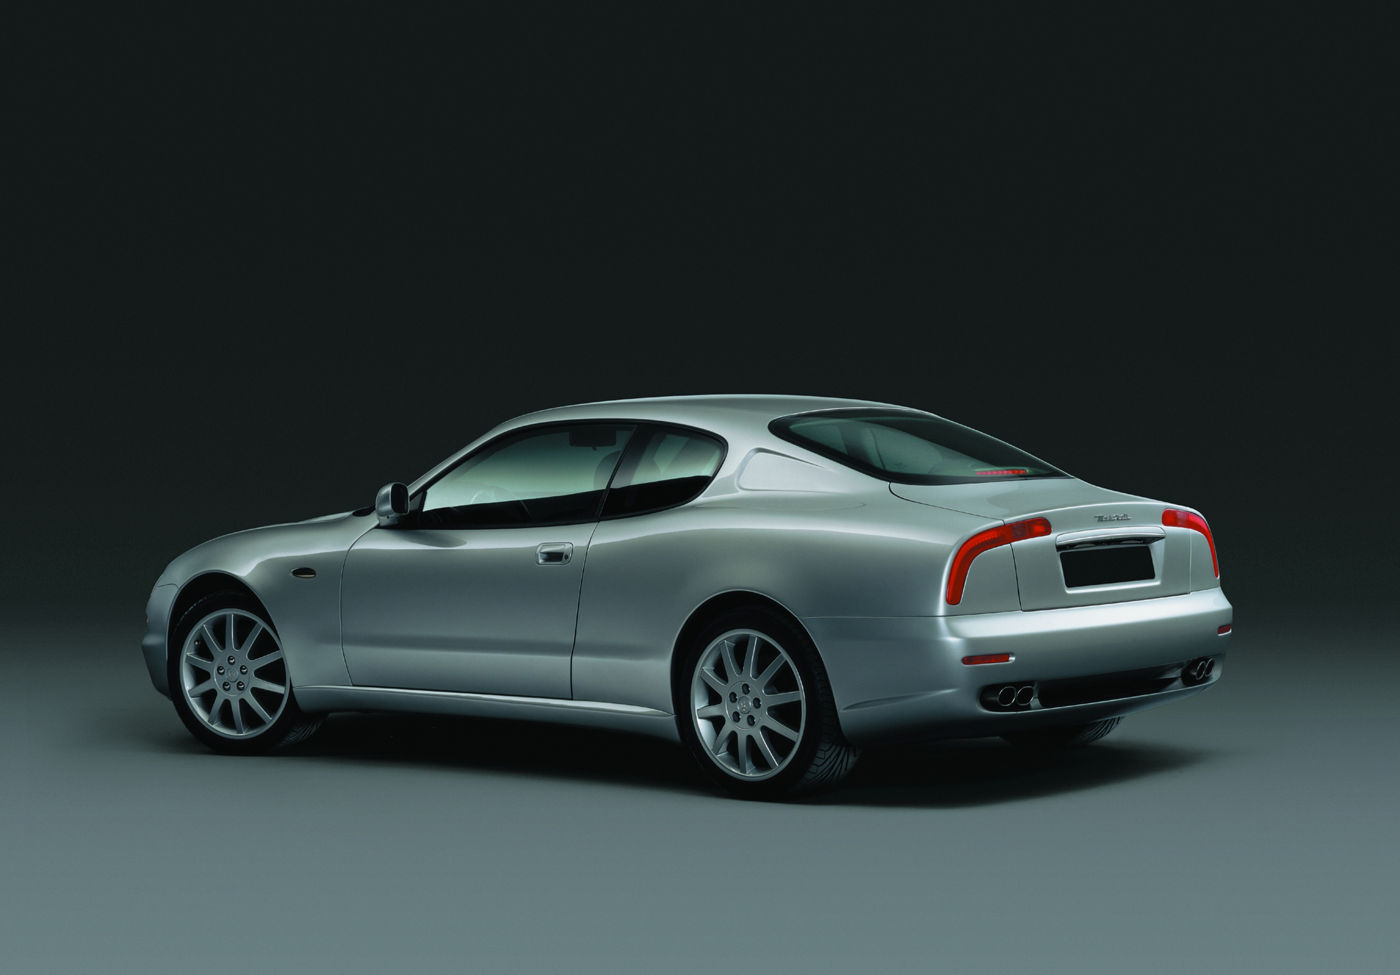 1998 Maserati 3200GT - rear view of the classic sports car model in gray